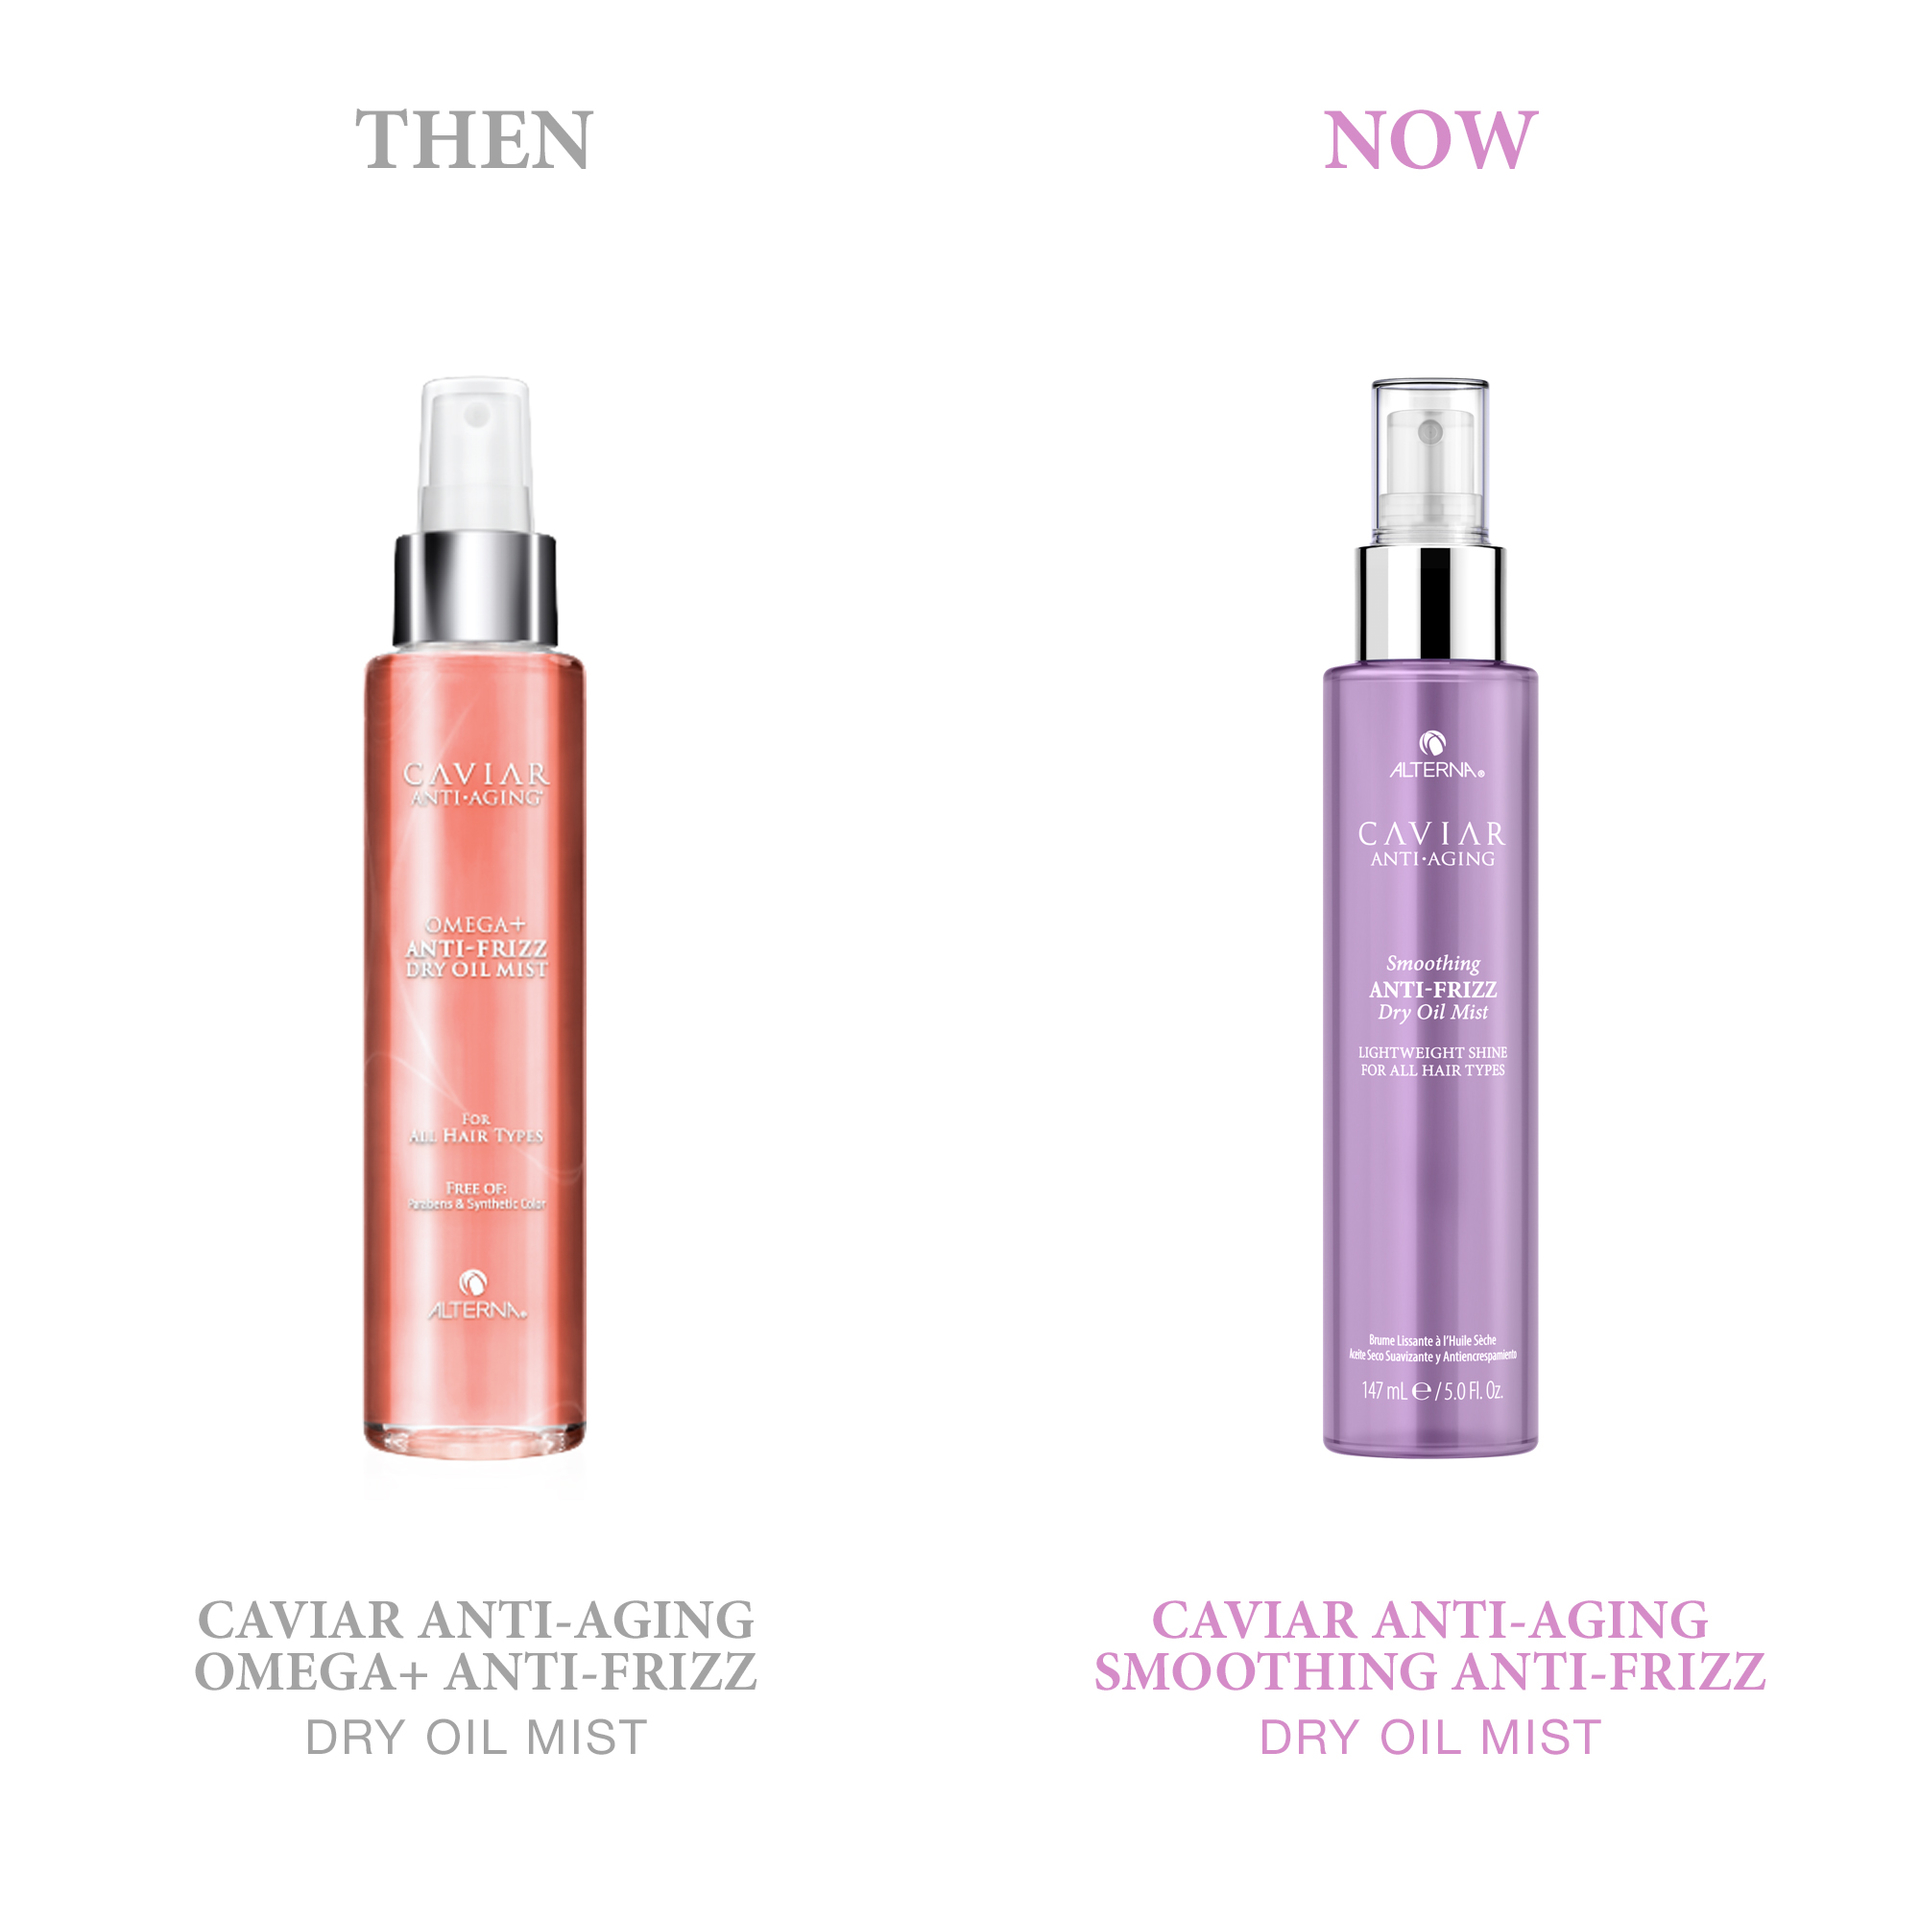 Caviar Anti Aging Smoothing Anti Frizz Dry Oil Mist Alterna Haircare